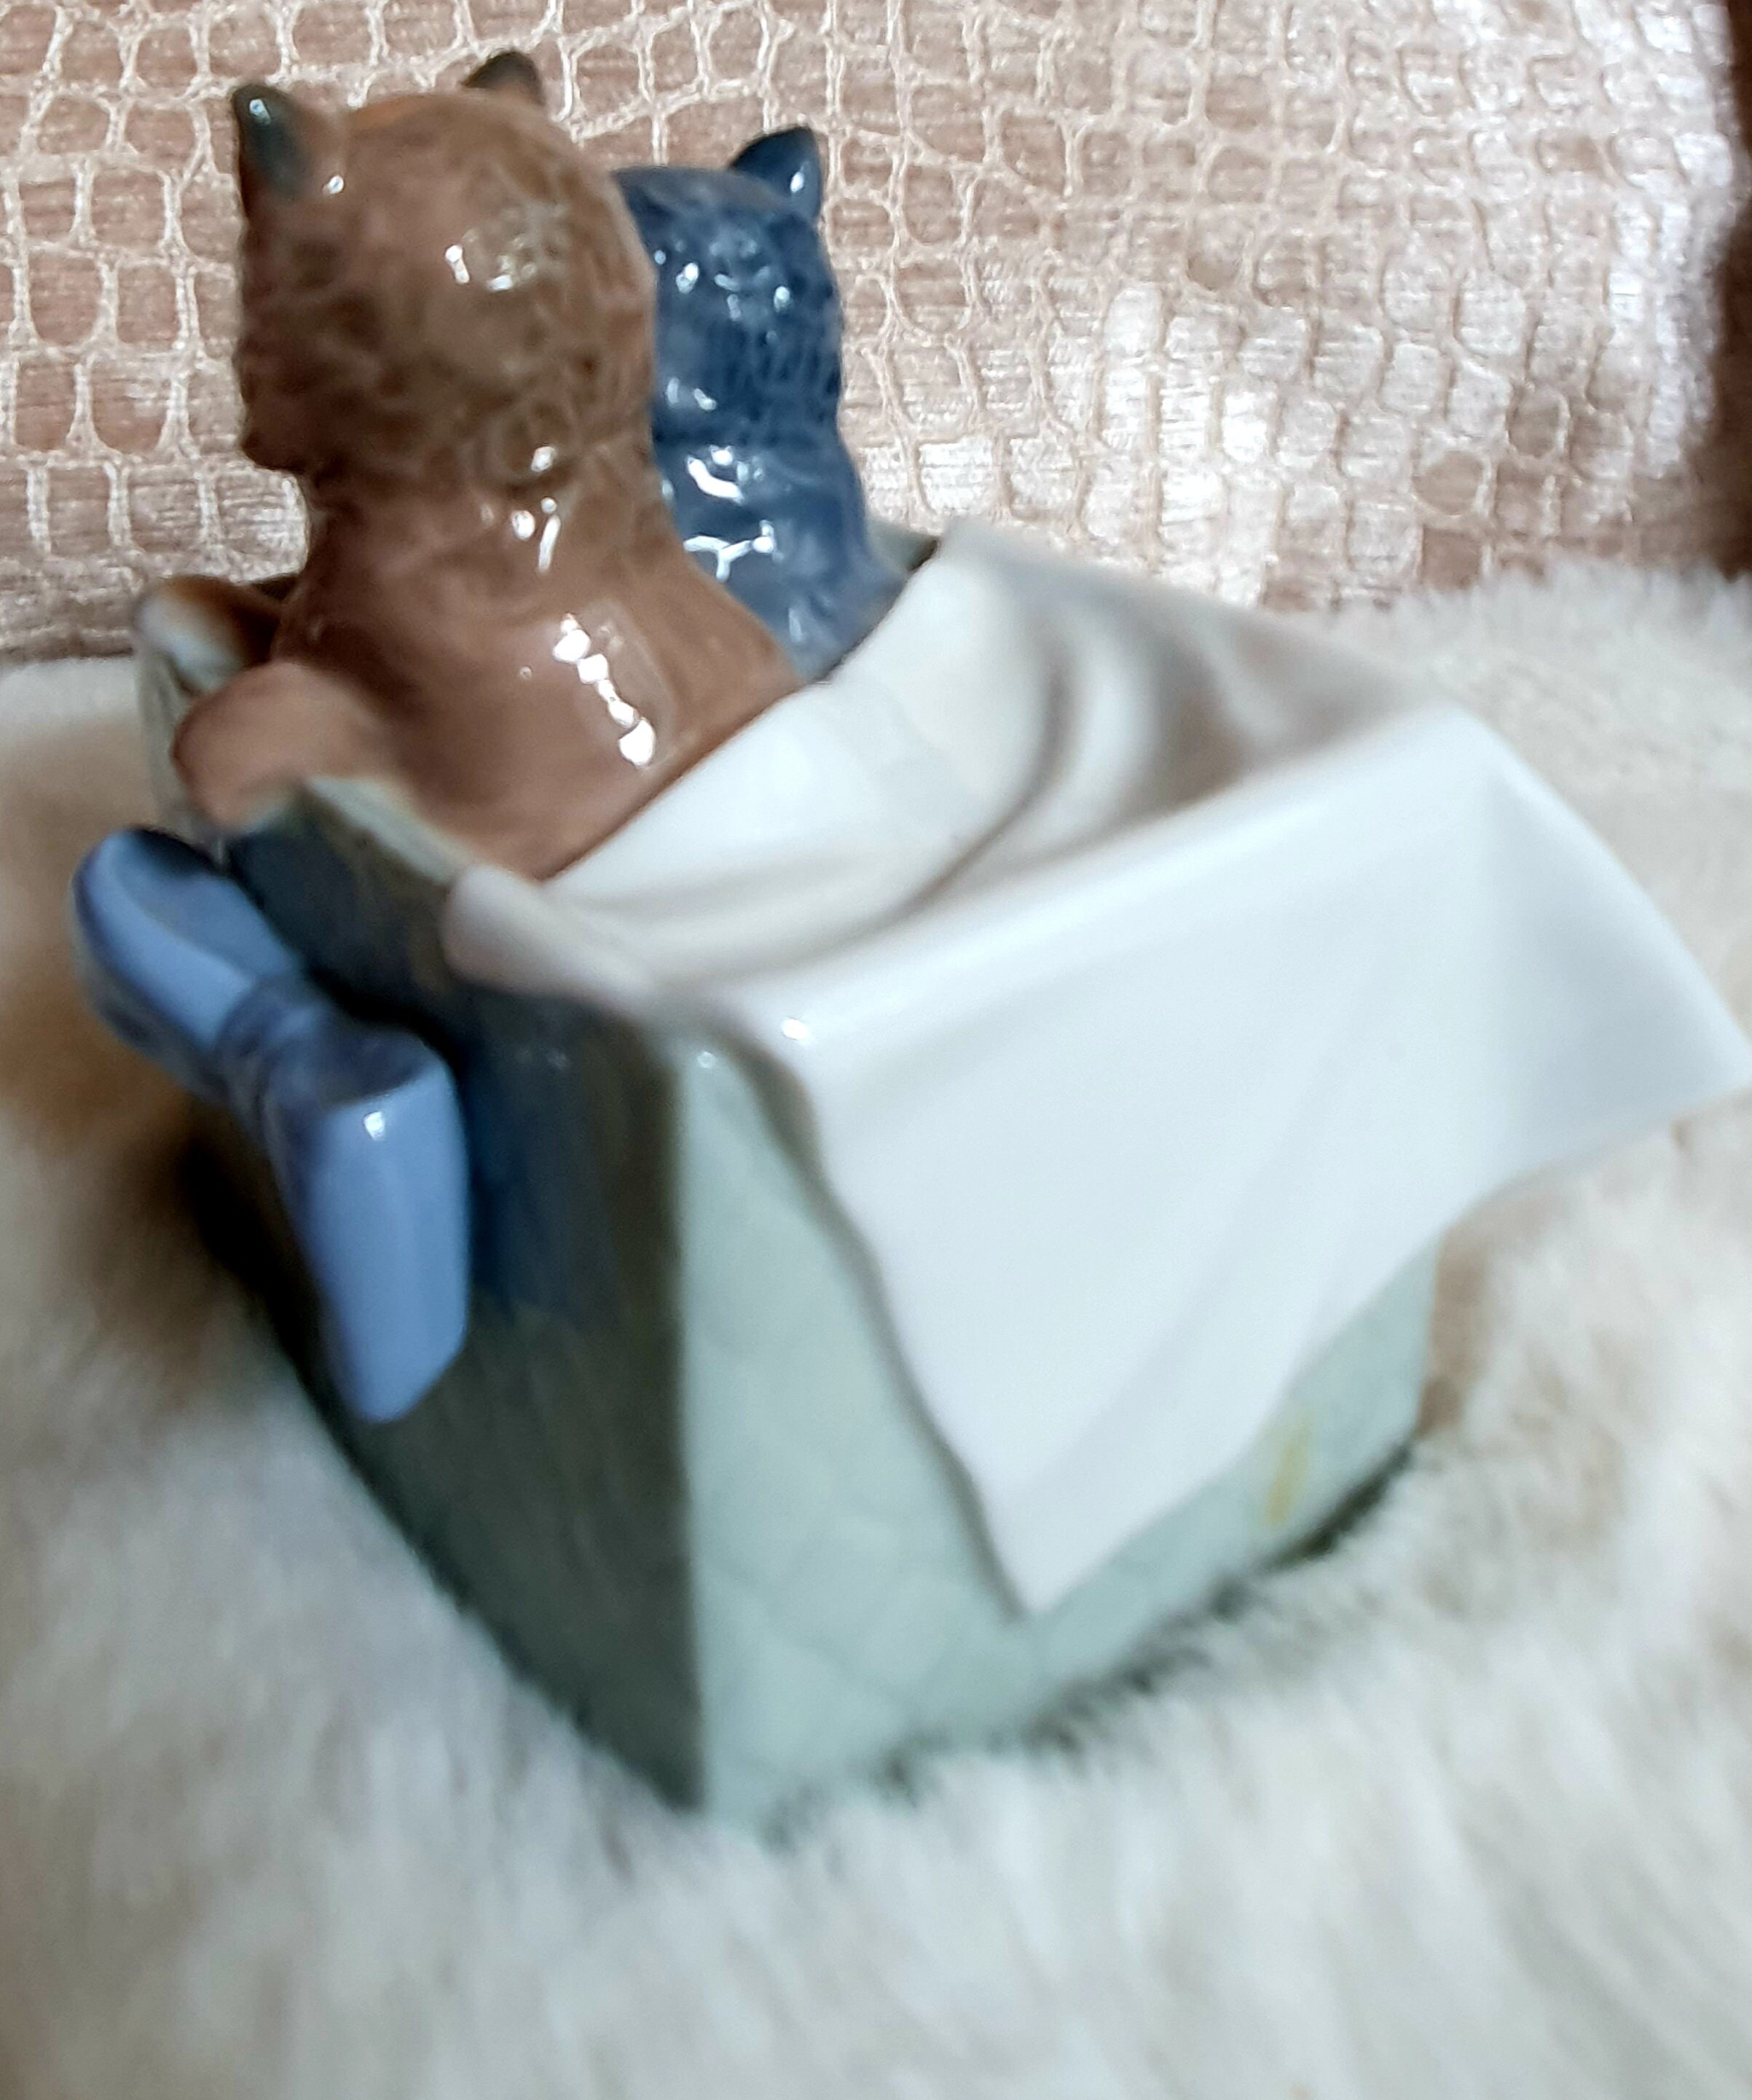 Lladró Figurine, NAO 1080 Kitten in Washing Basket, in Box, Lladro Cat  Gifts, Animal Art, Cat Lovers Gift, Animal Figurines Statues Retired -   Canada